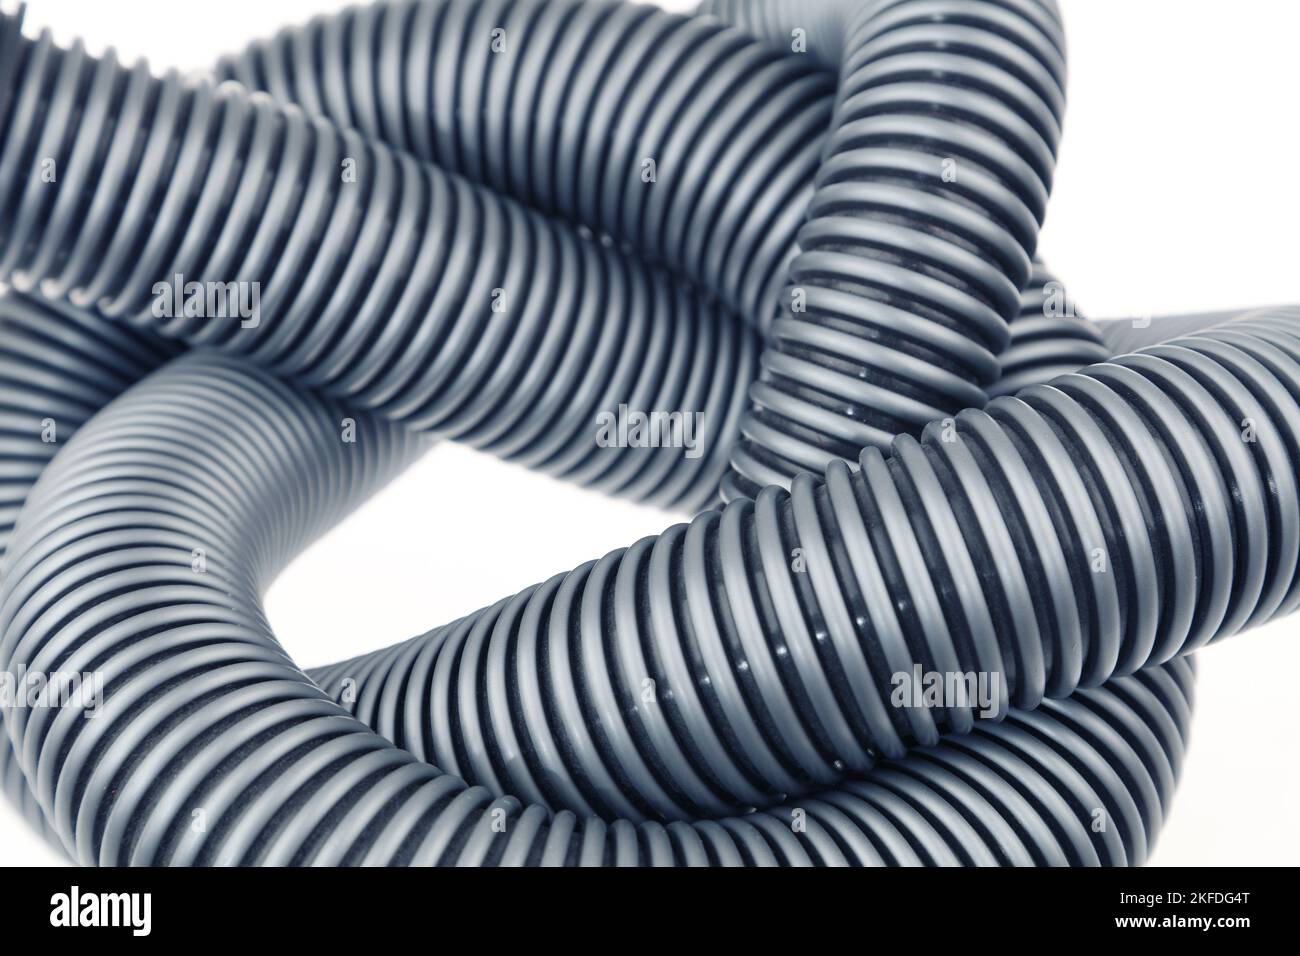 Coil of plastic hose pipe Stock Photo